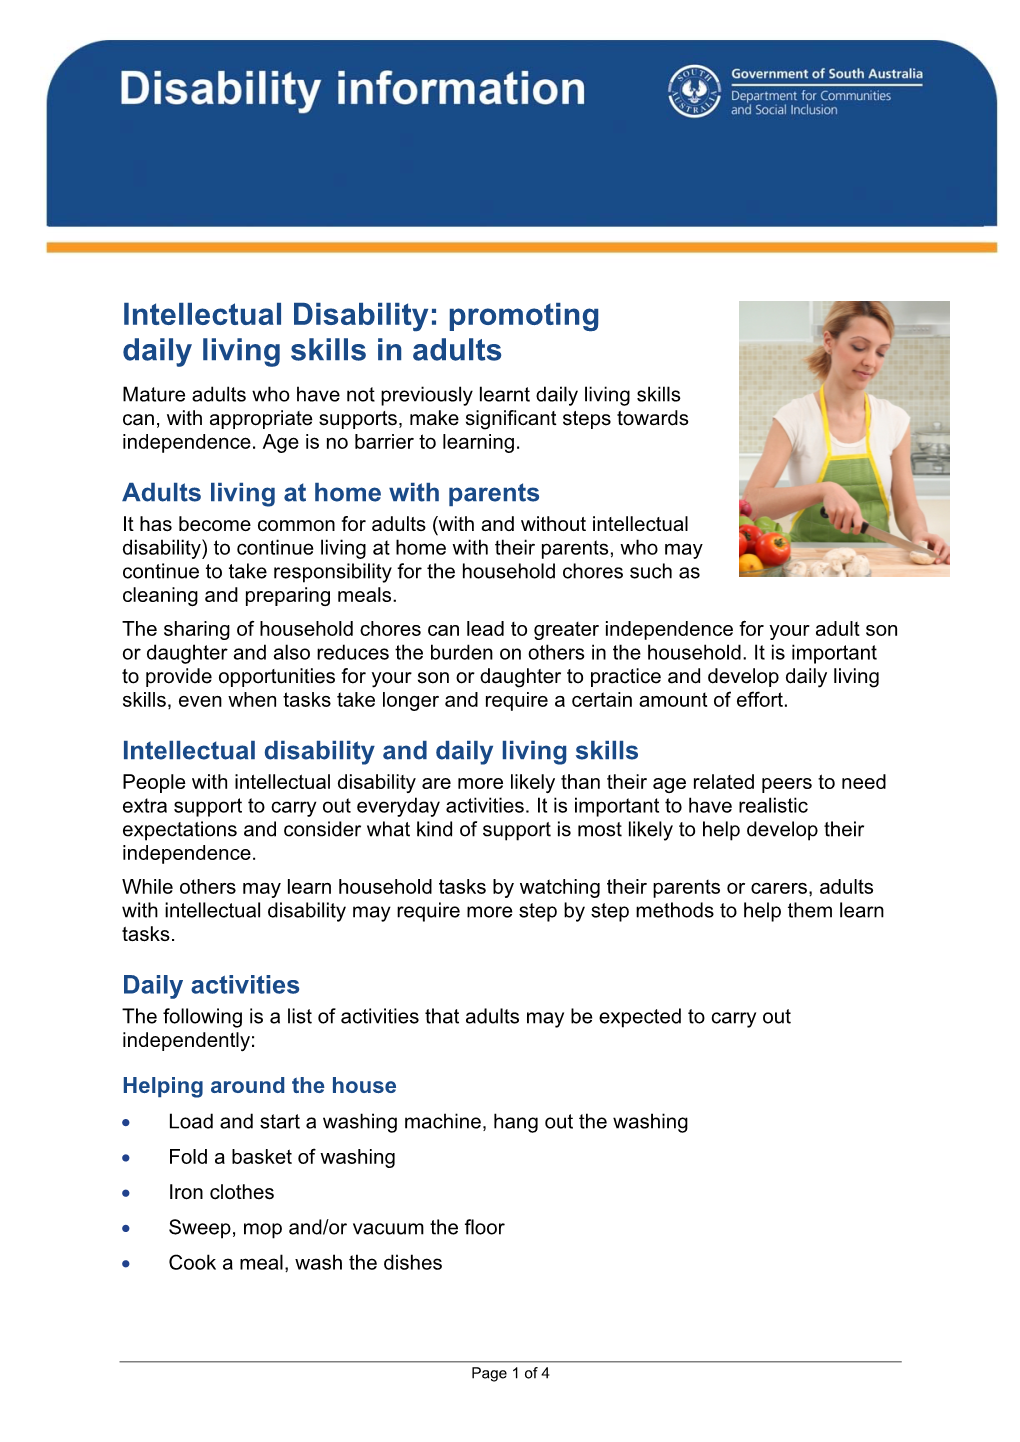 Intellectual Disability: Promoting Daily Living Skills in Adults